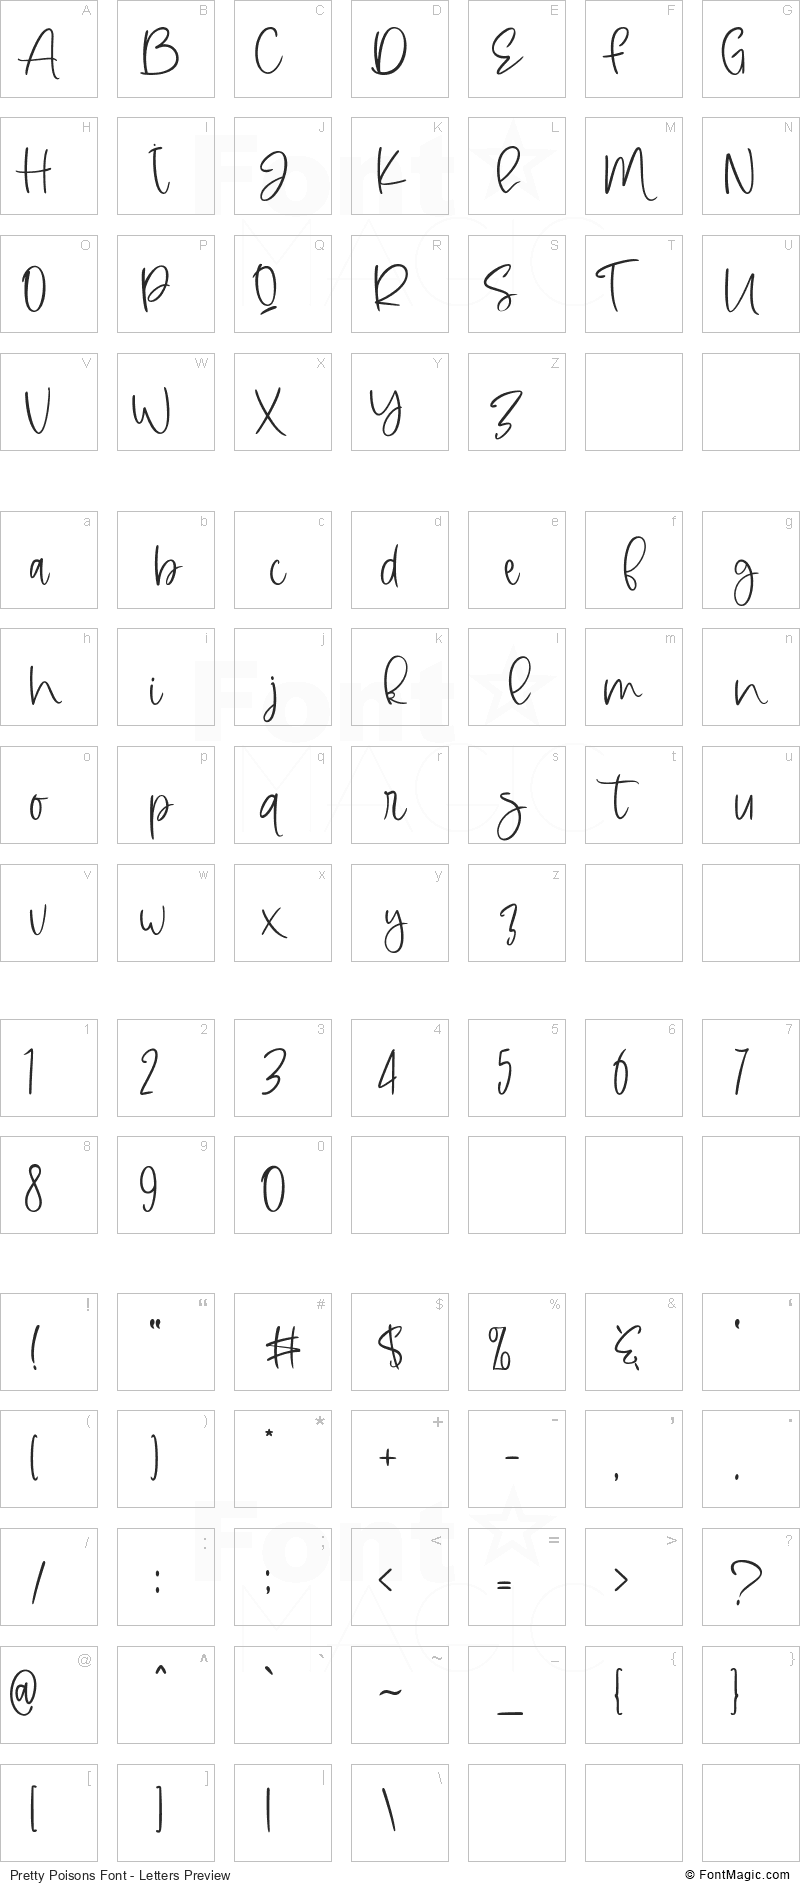 Pretty Poisons Font - All Latters Preview Chart